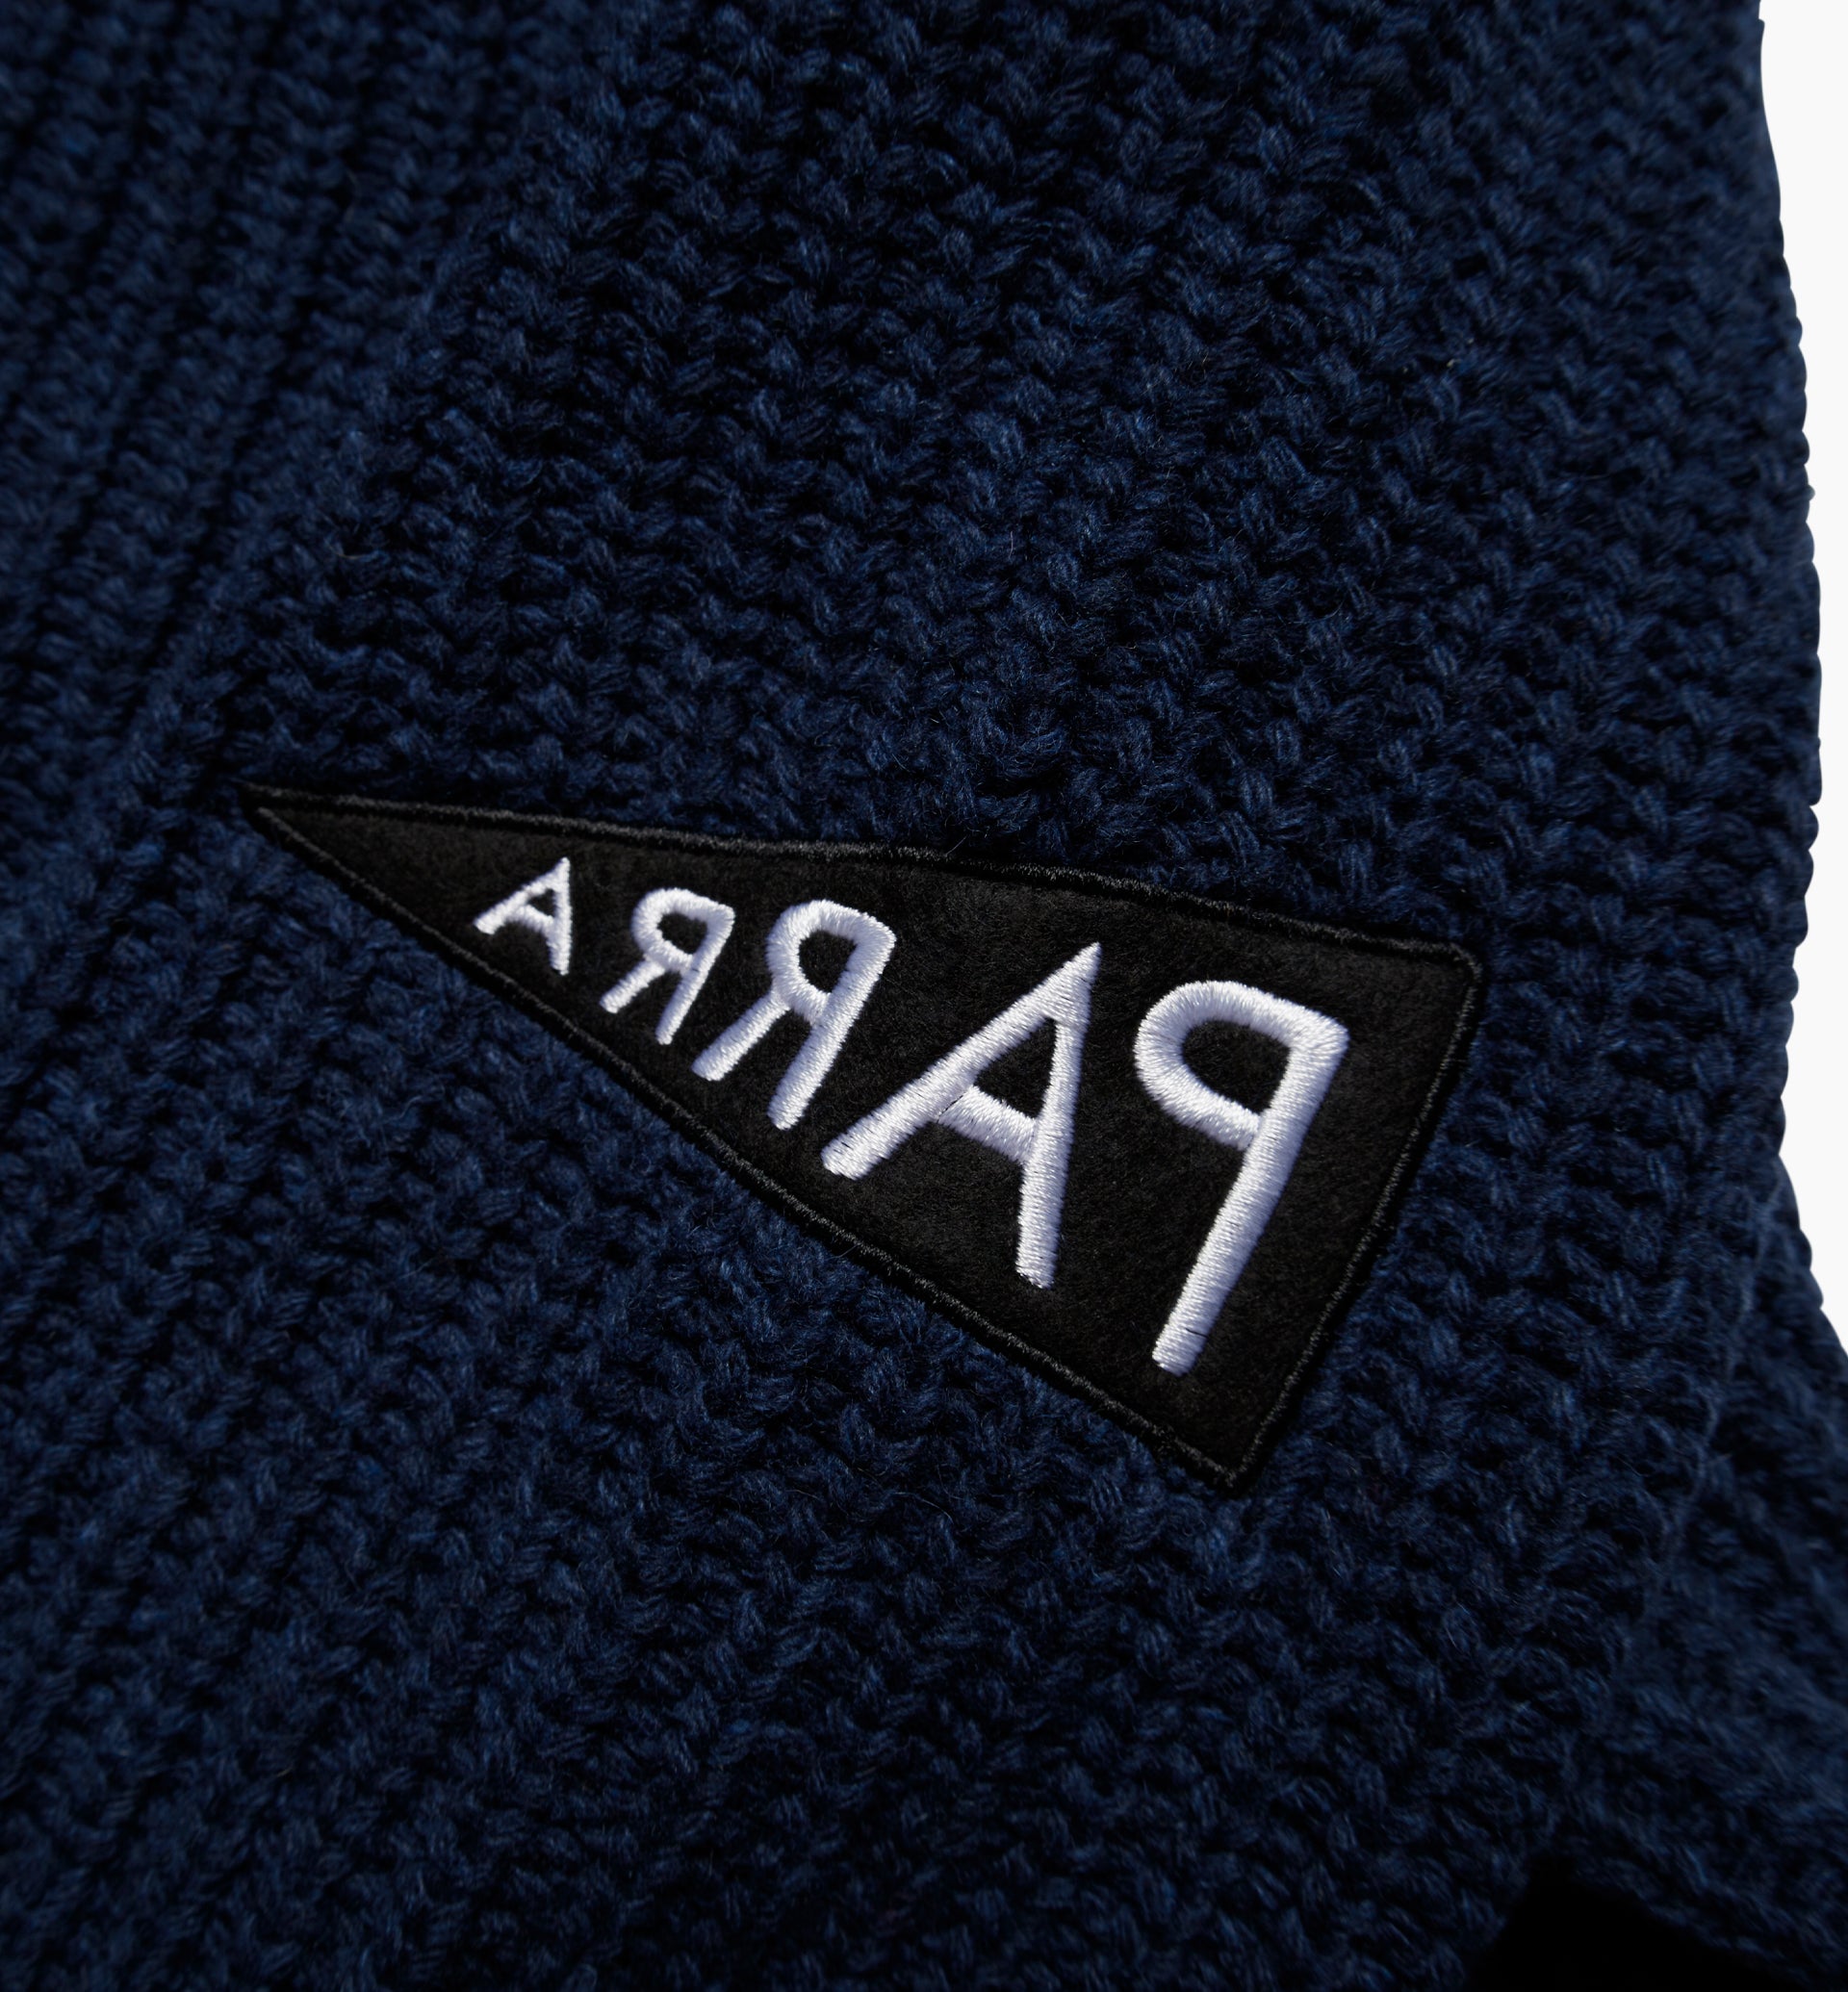 Parra - mirrored flag logo knitted pullover